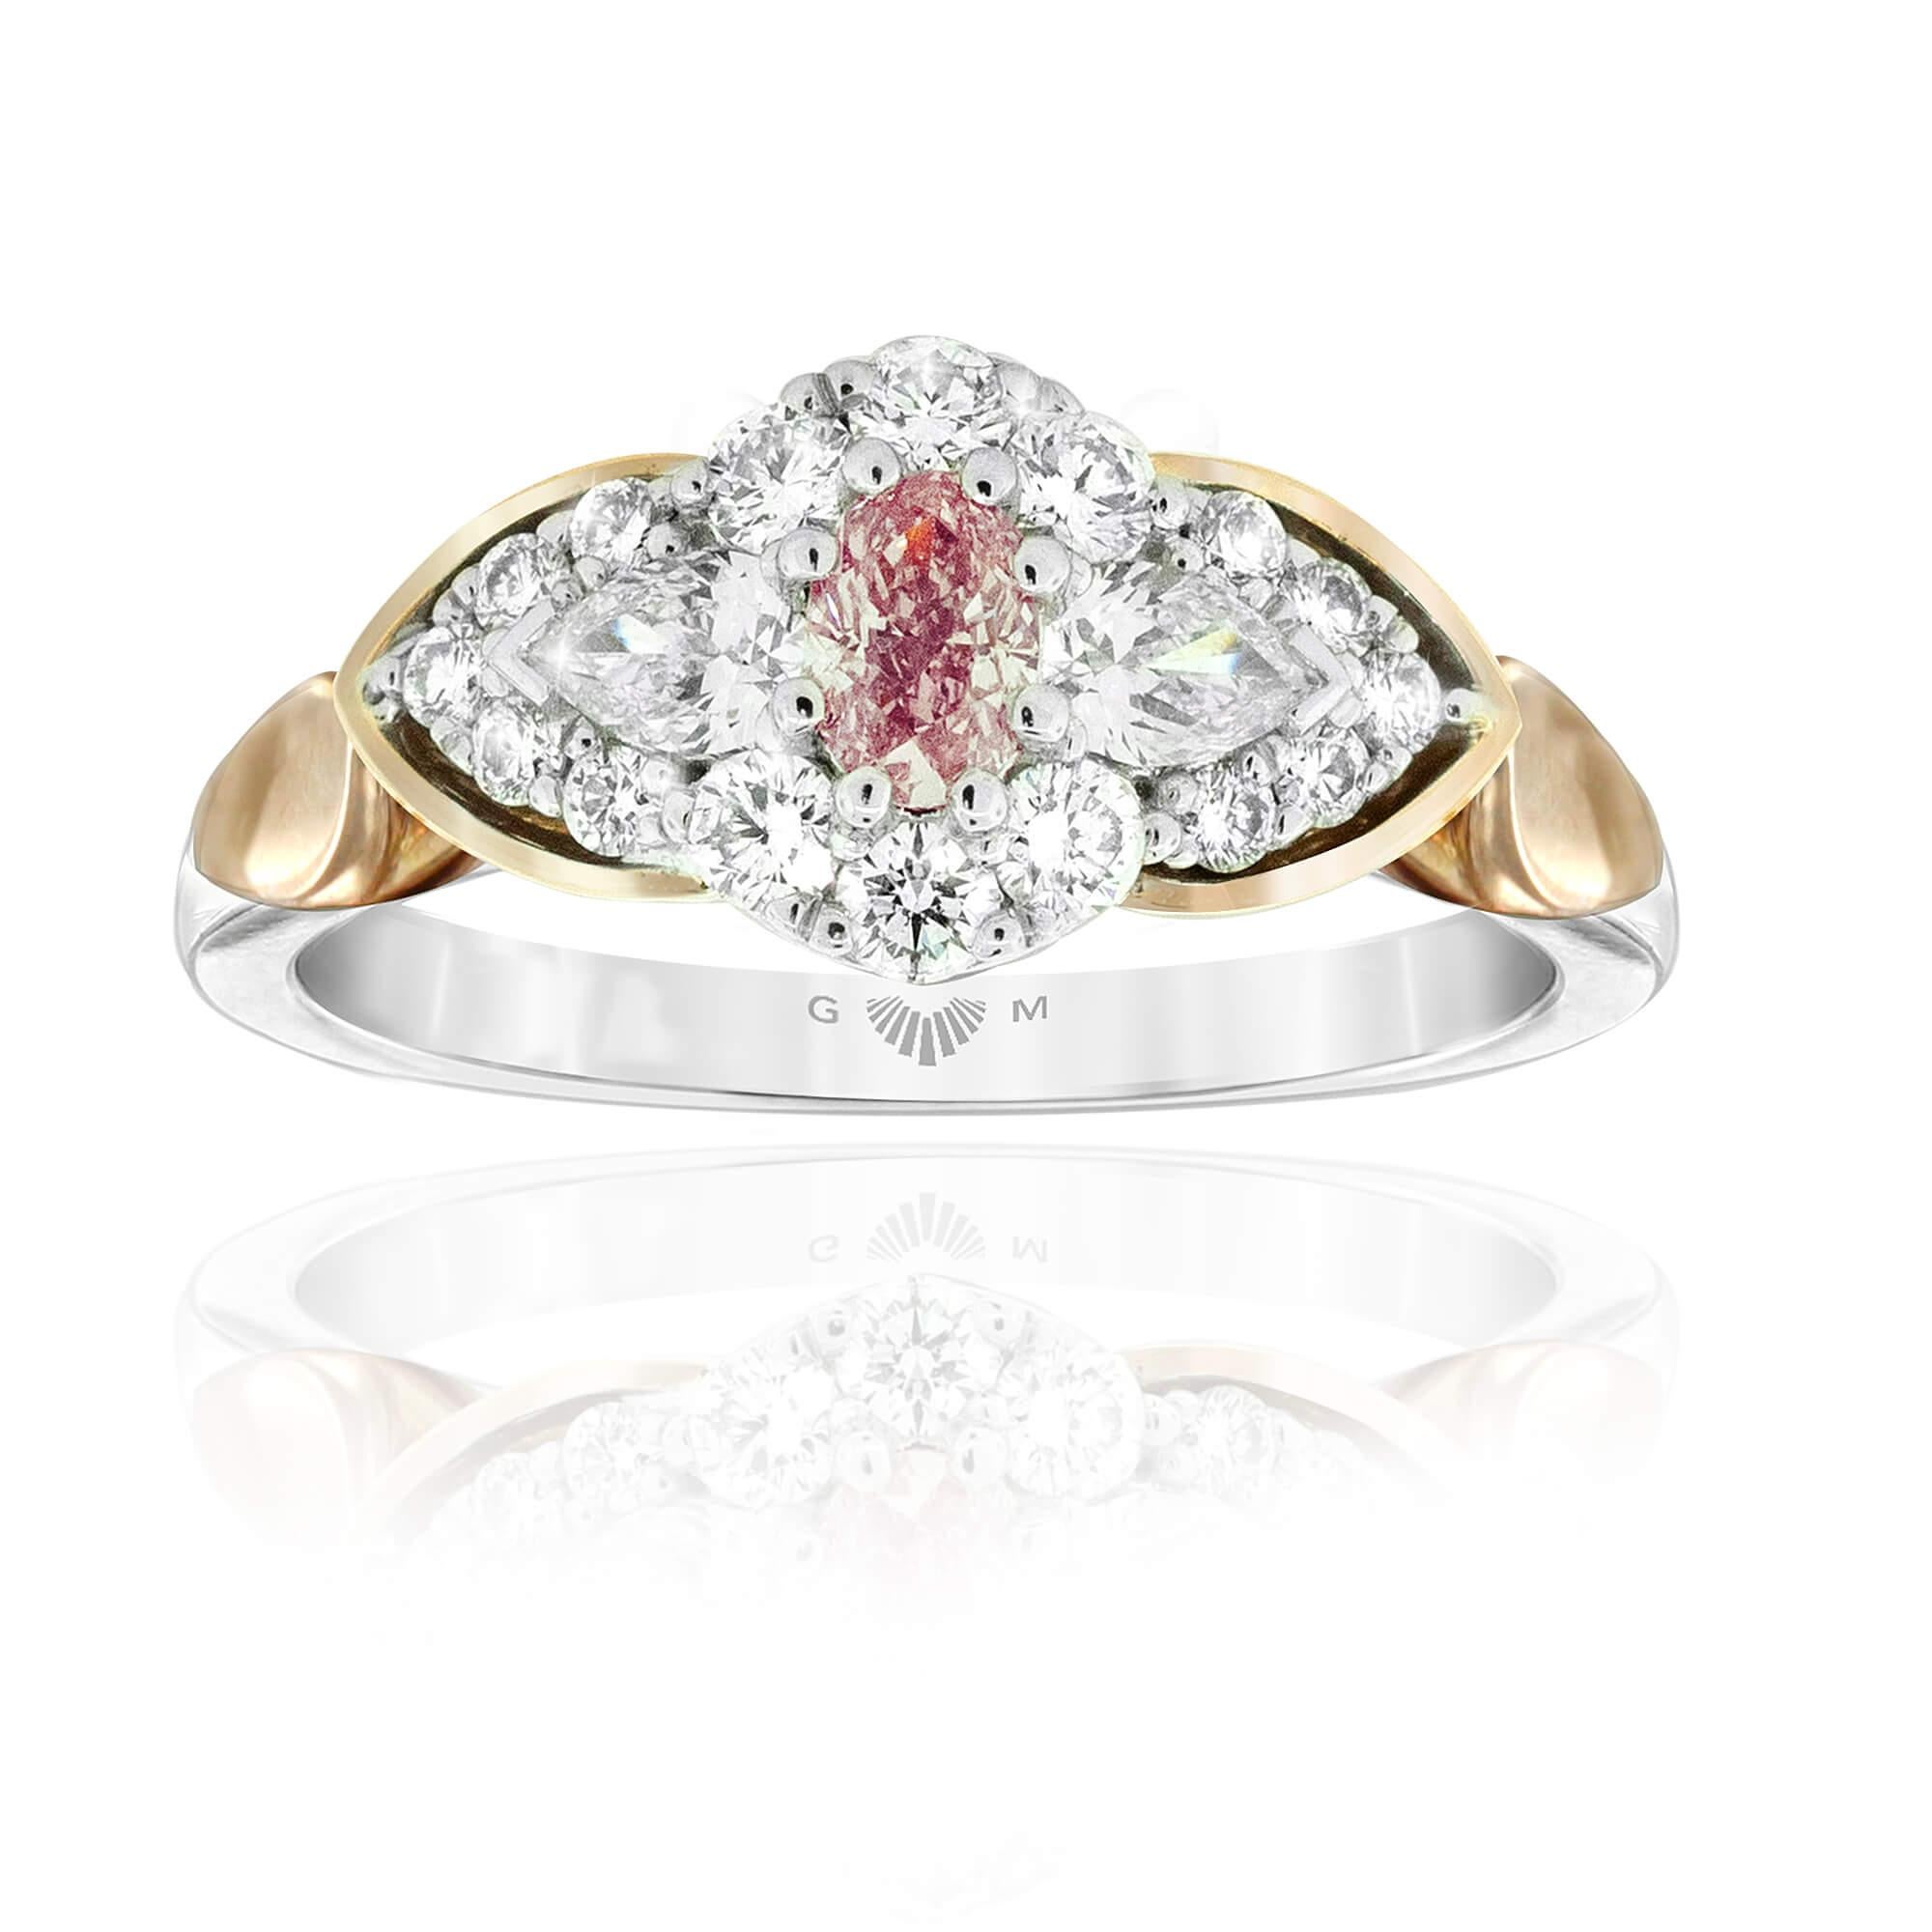 Mixed Cut Pink & White Diamond Ring - Gerard McCabe's Eagle Design For Sale